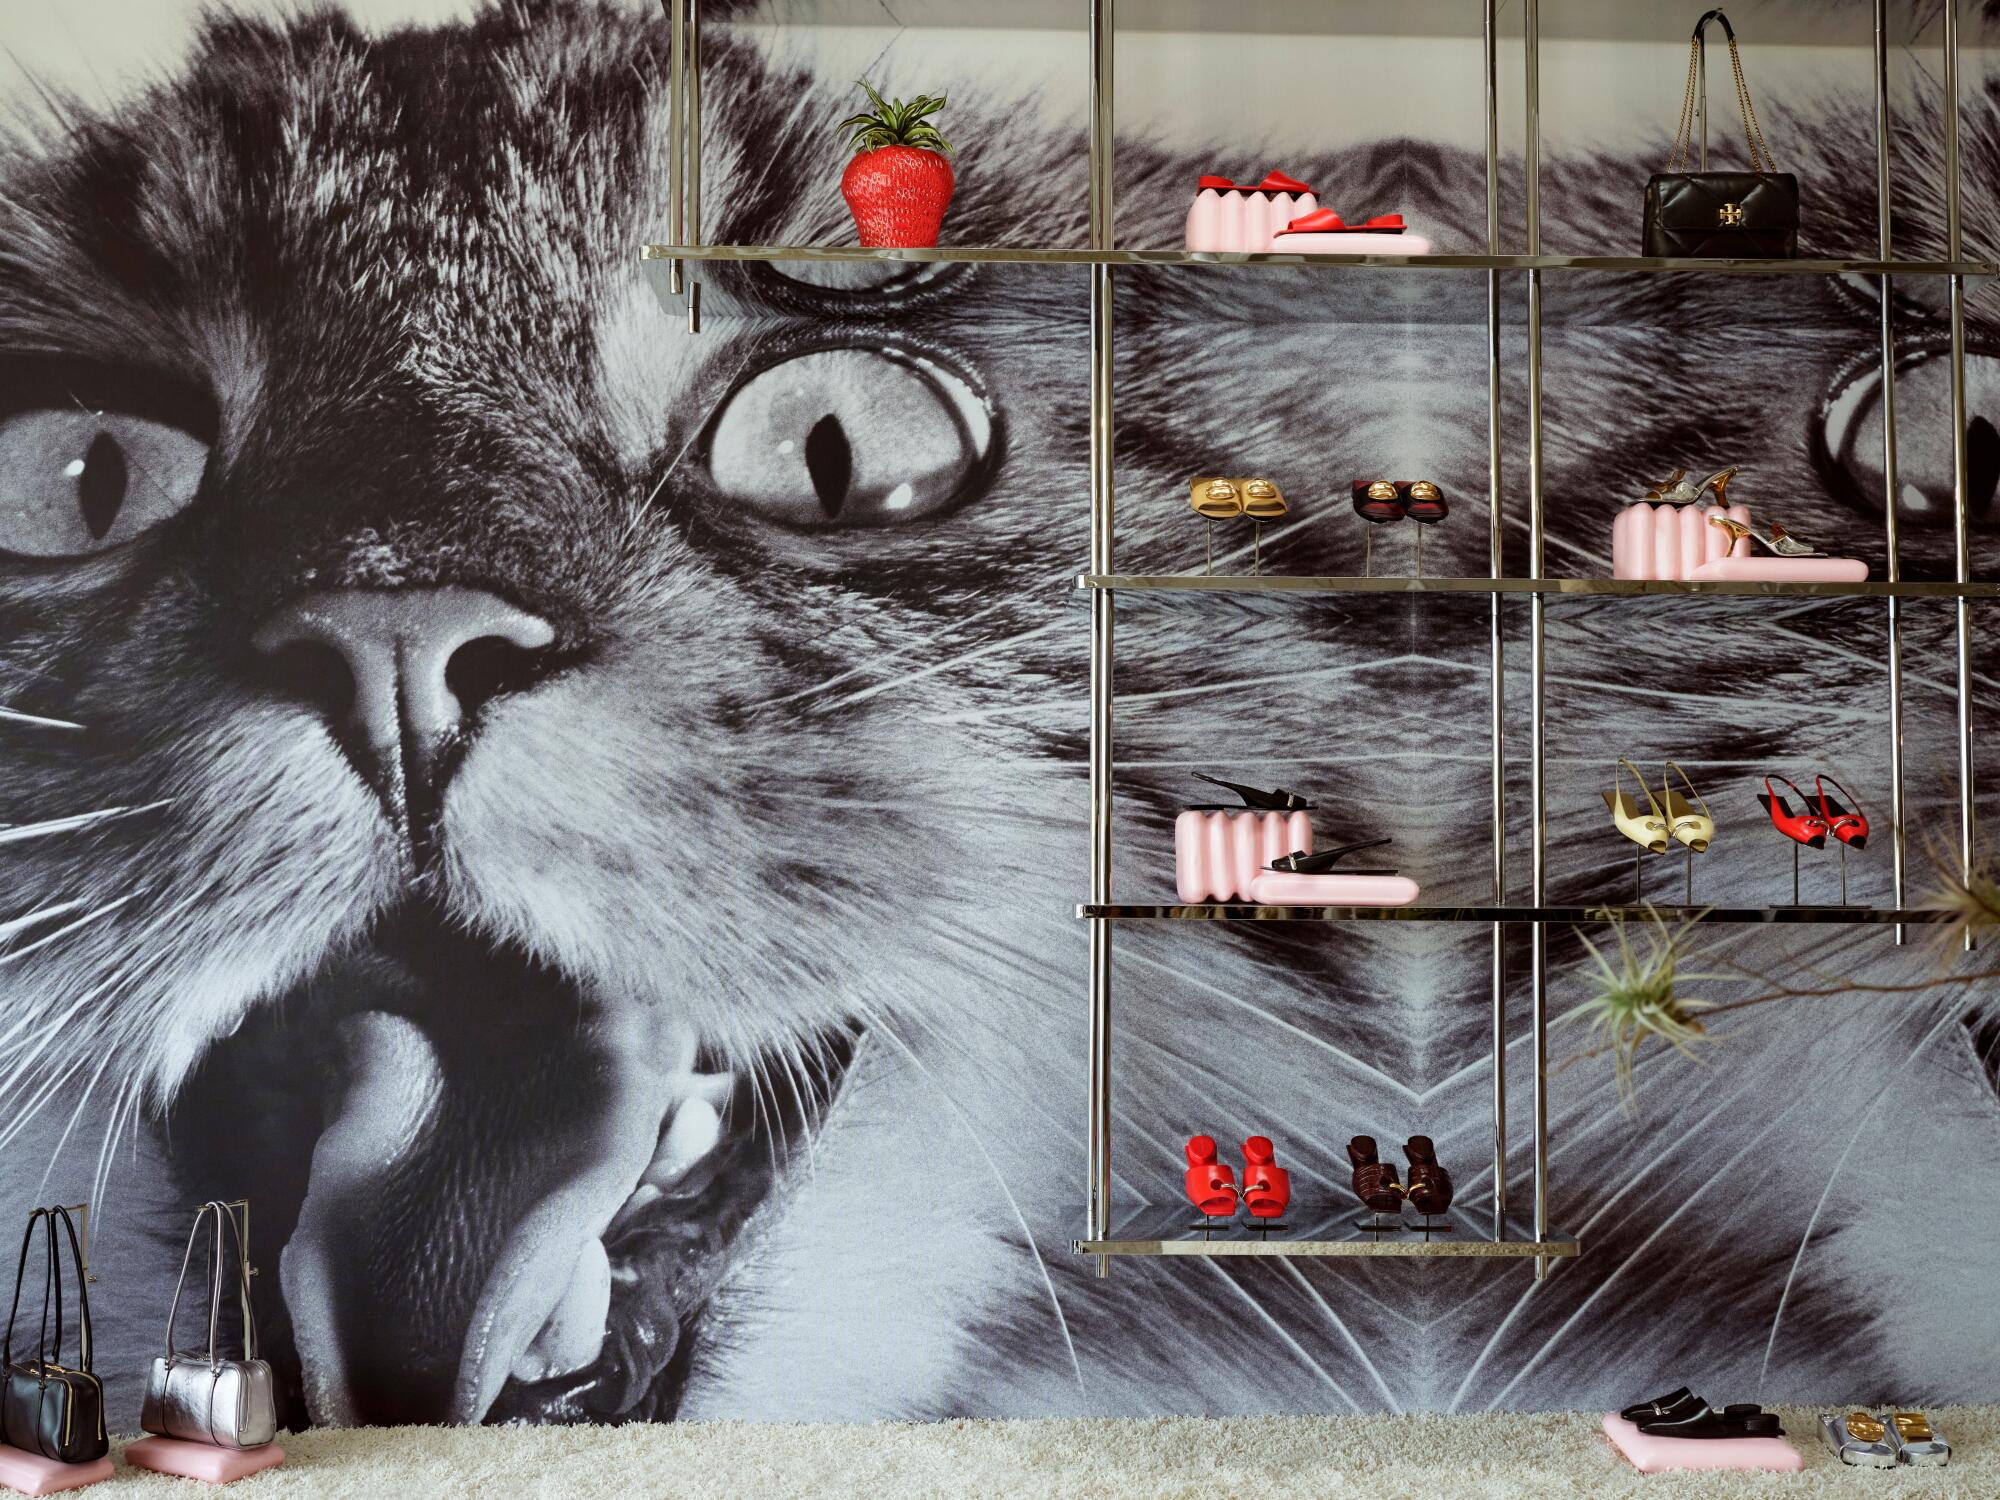 The cat wall art for the Tory Burch concept store in Los Angeles.